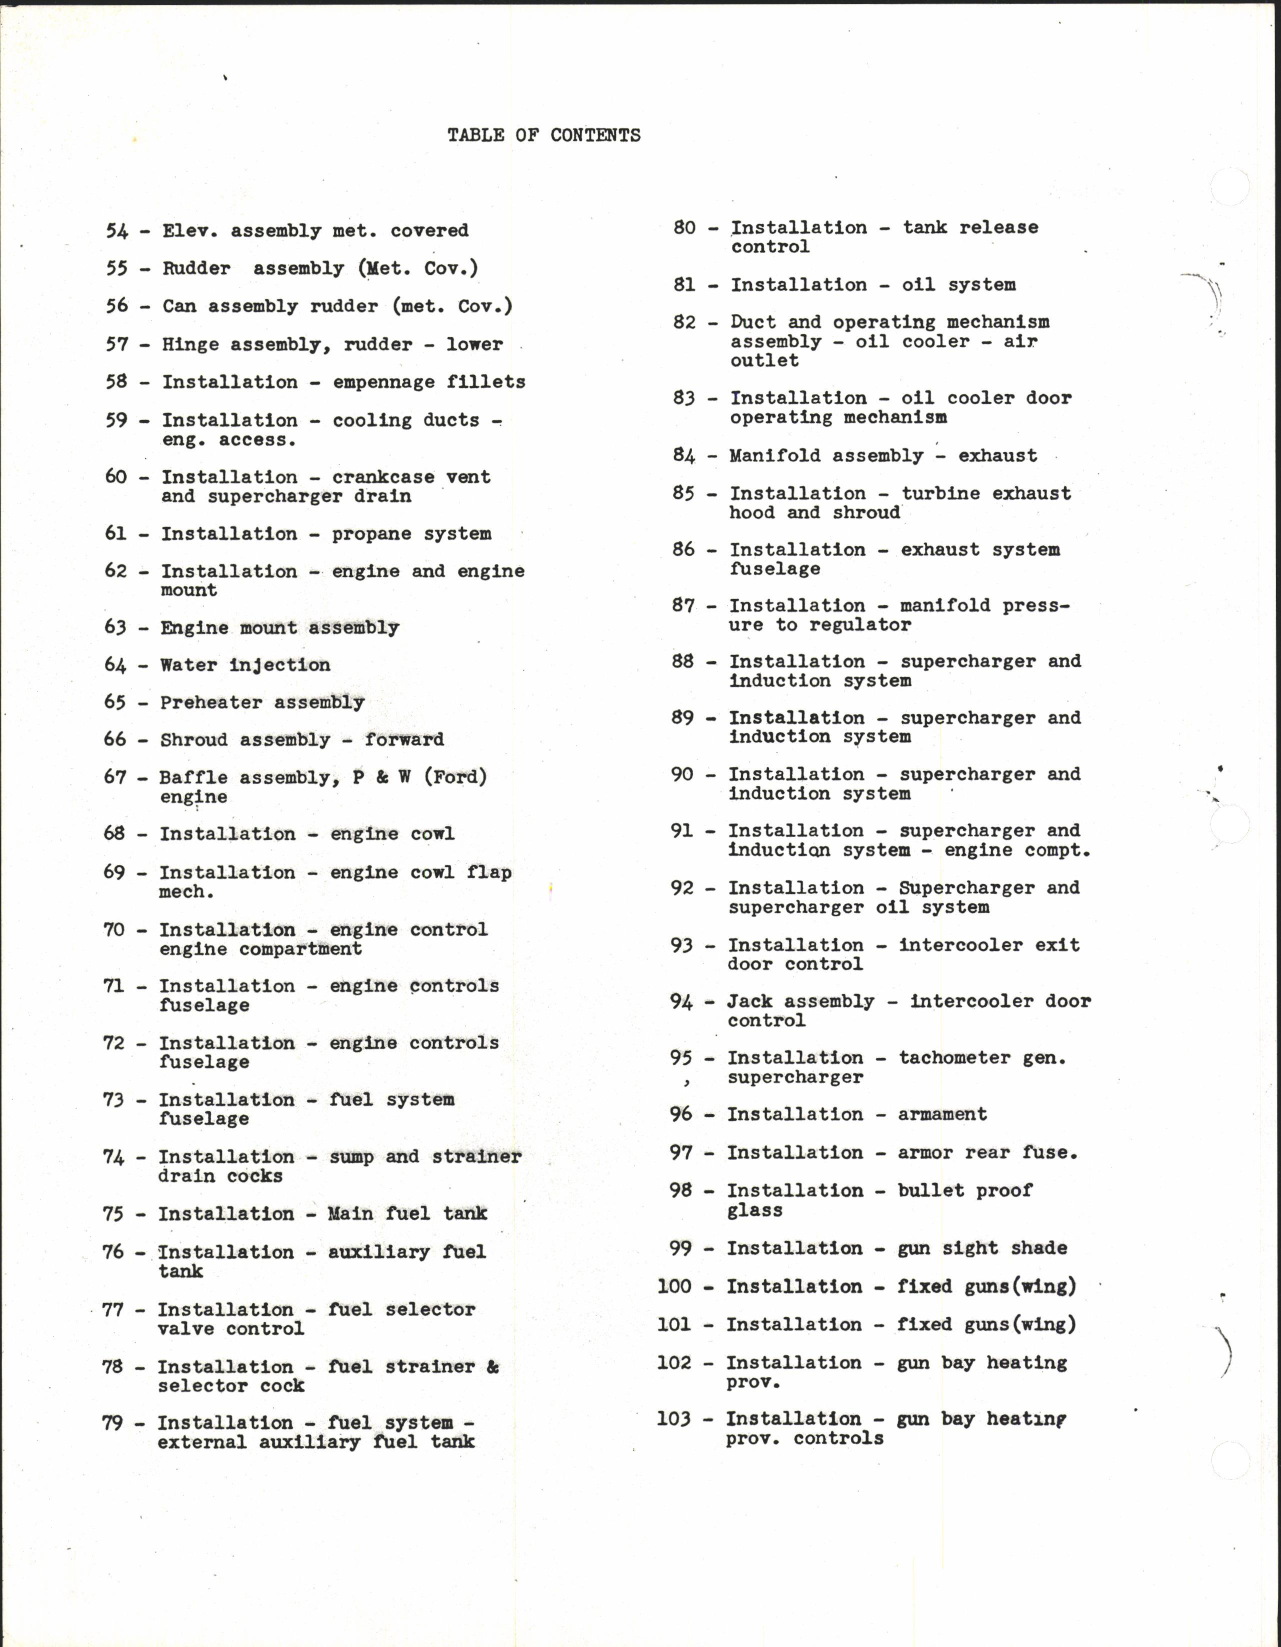 Sample page 6 from AirCorps Library document: Parts Catalog for Model P-47 Airplanes